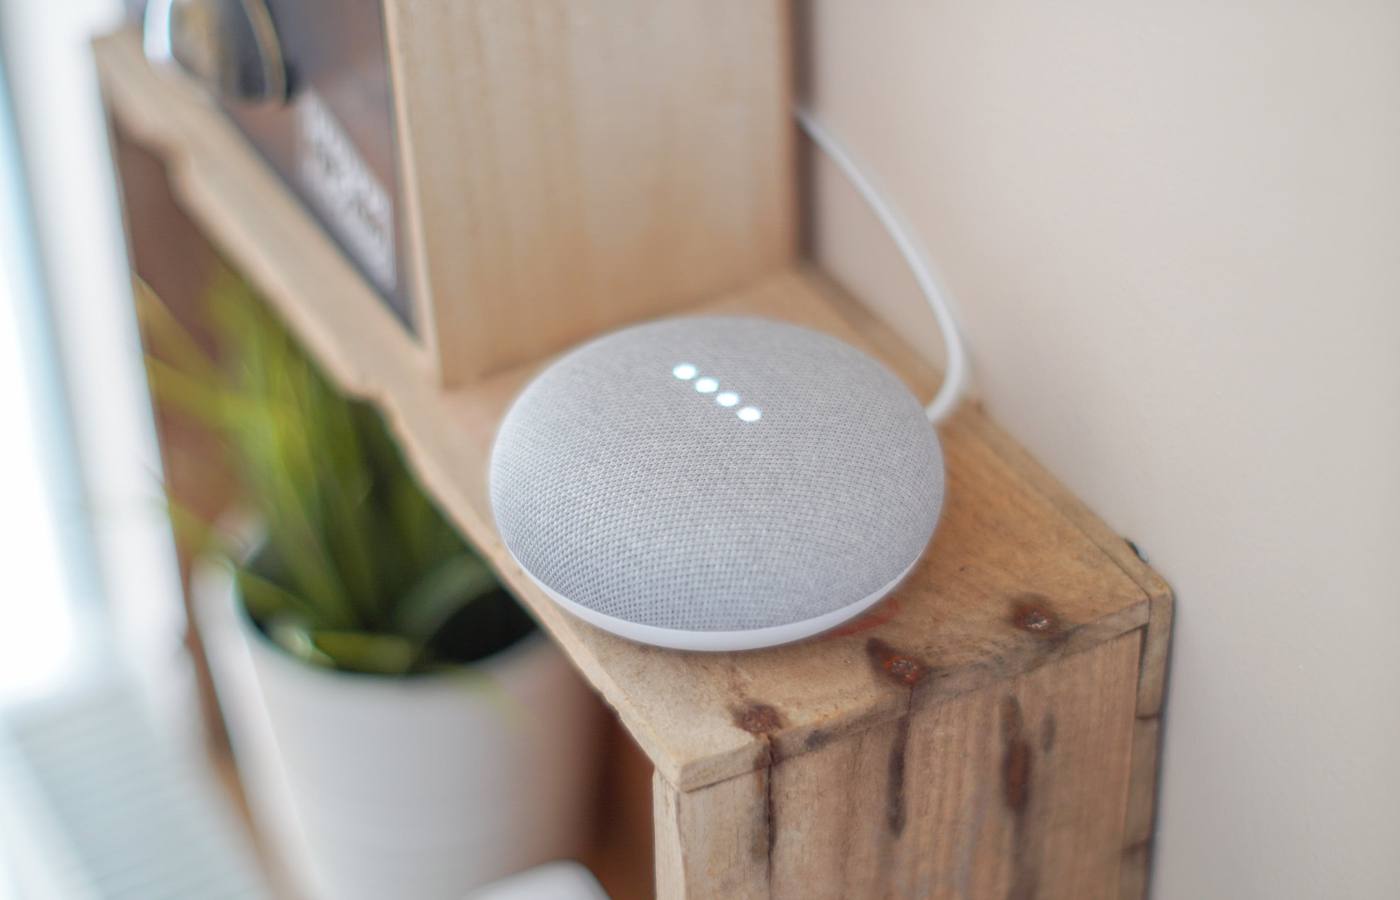 Smart Locks that Work with Google Home: 3 Options